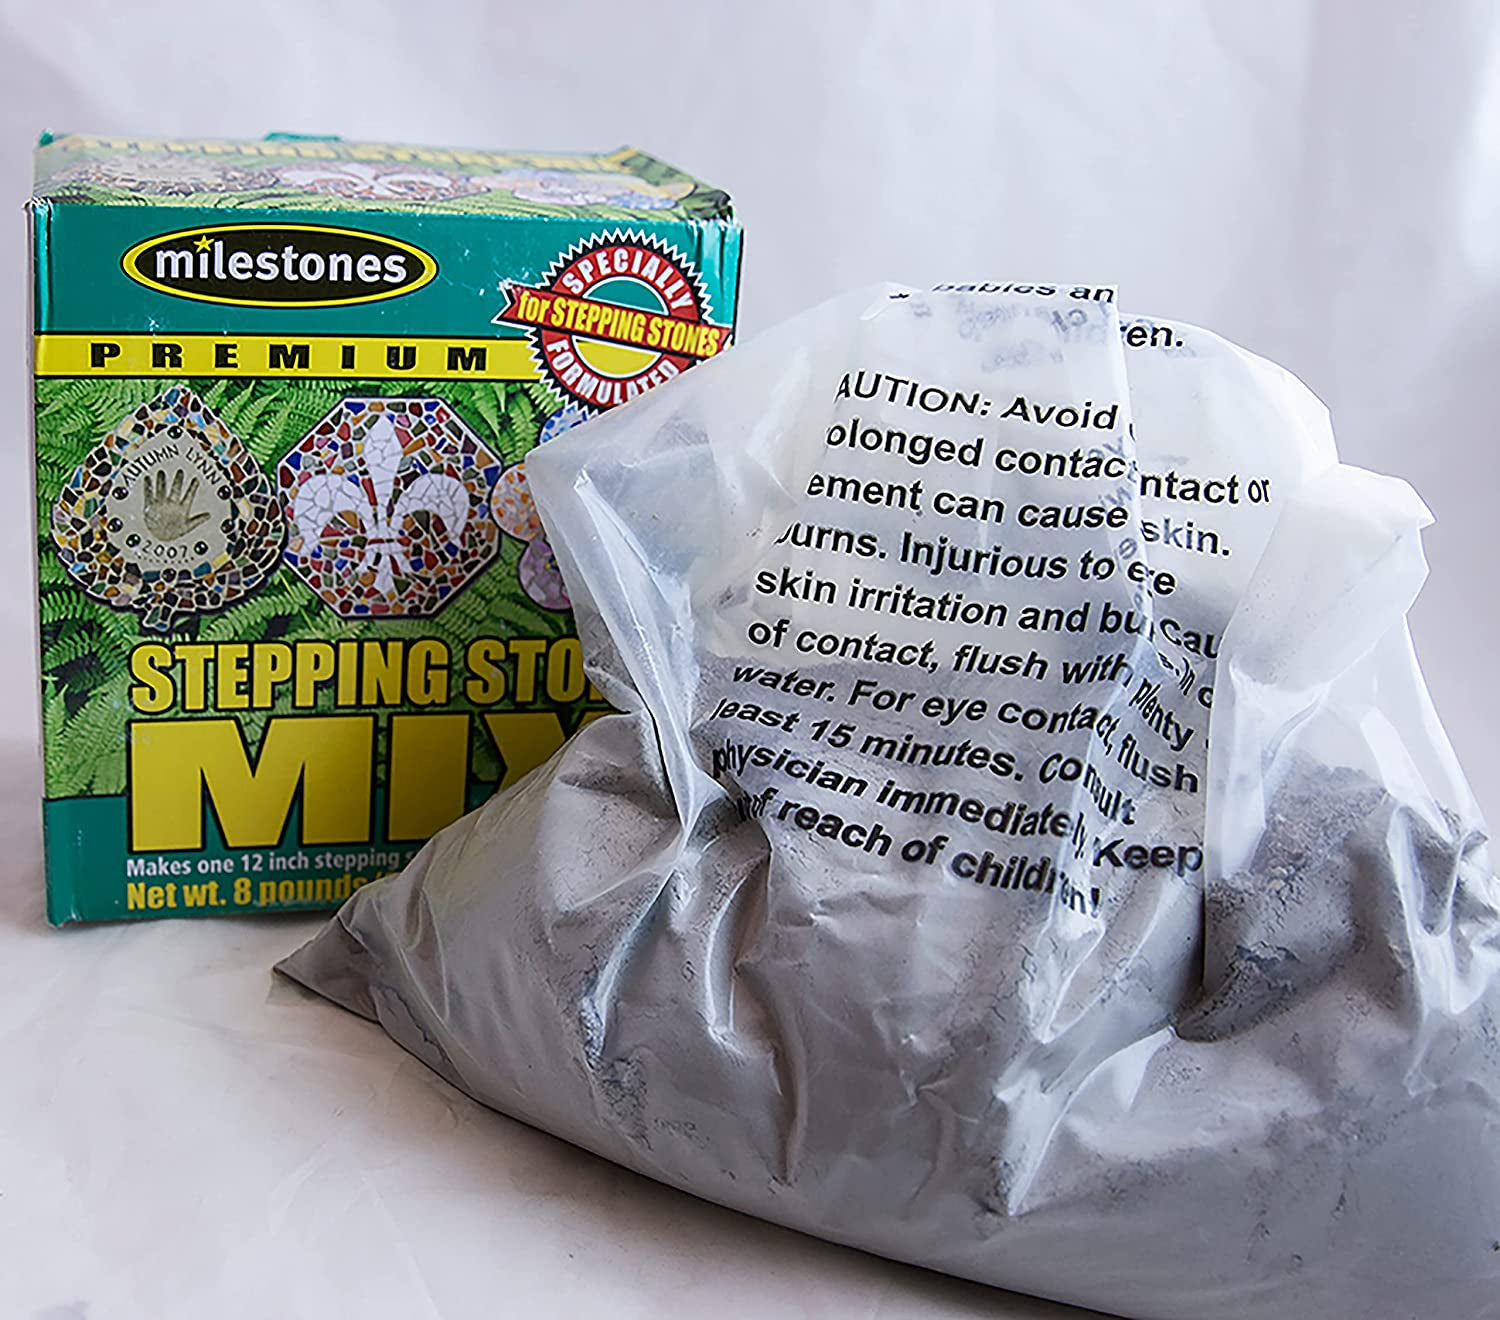 Midwest Products Co., Milestones Premium Stepping Stone Cement Mix 8 Pound Box for Stepping Stone Kits - 903-16102